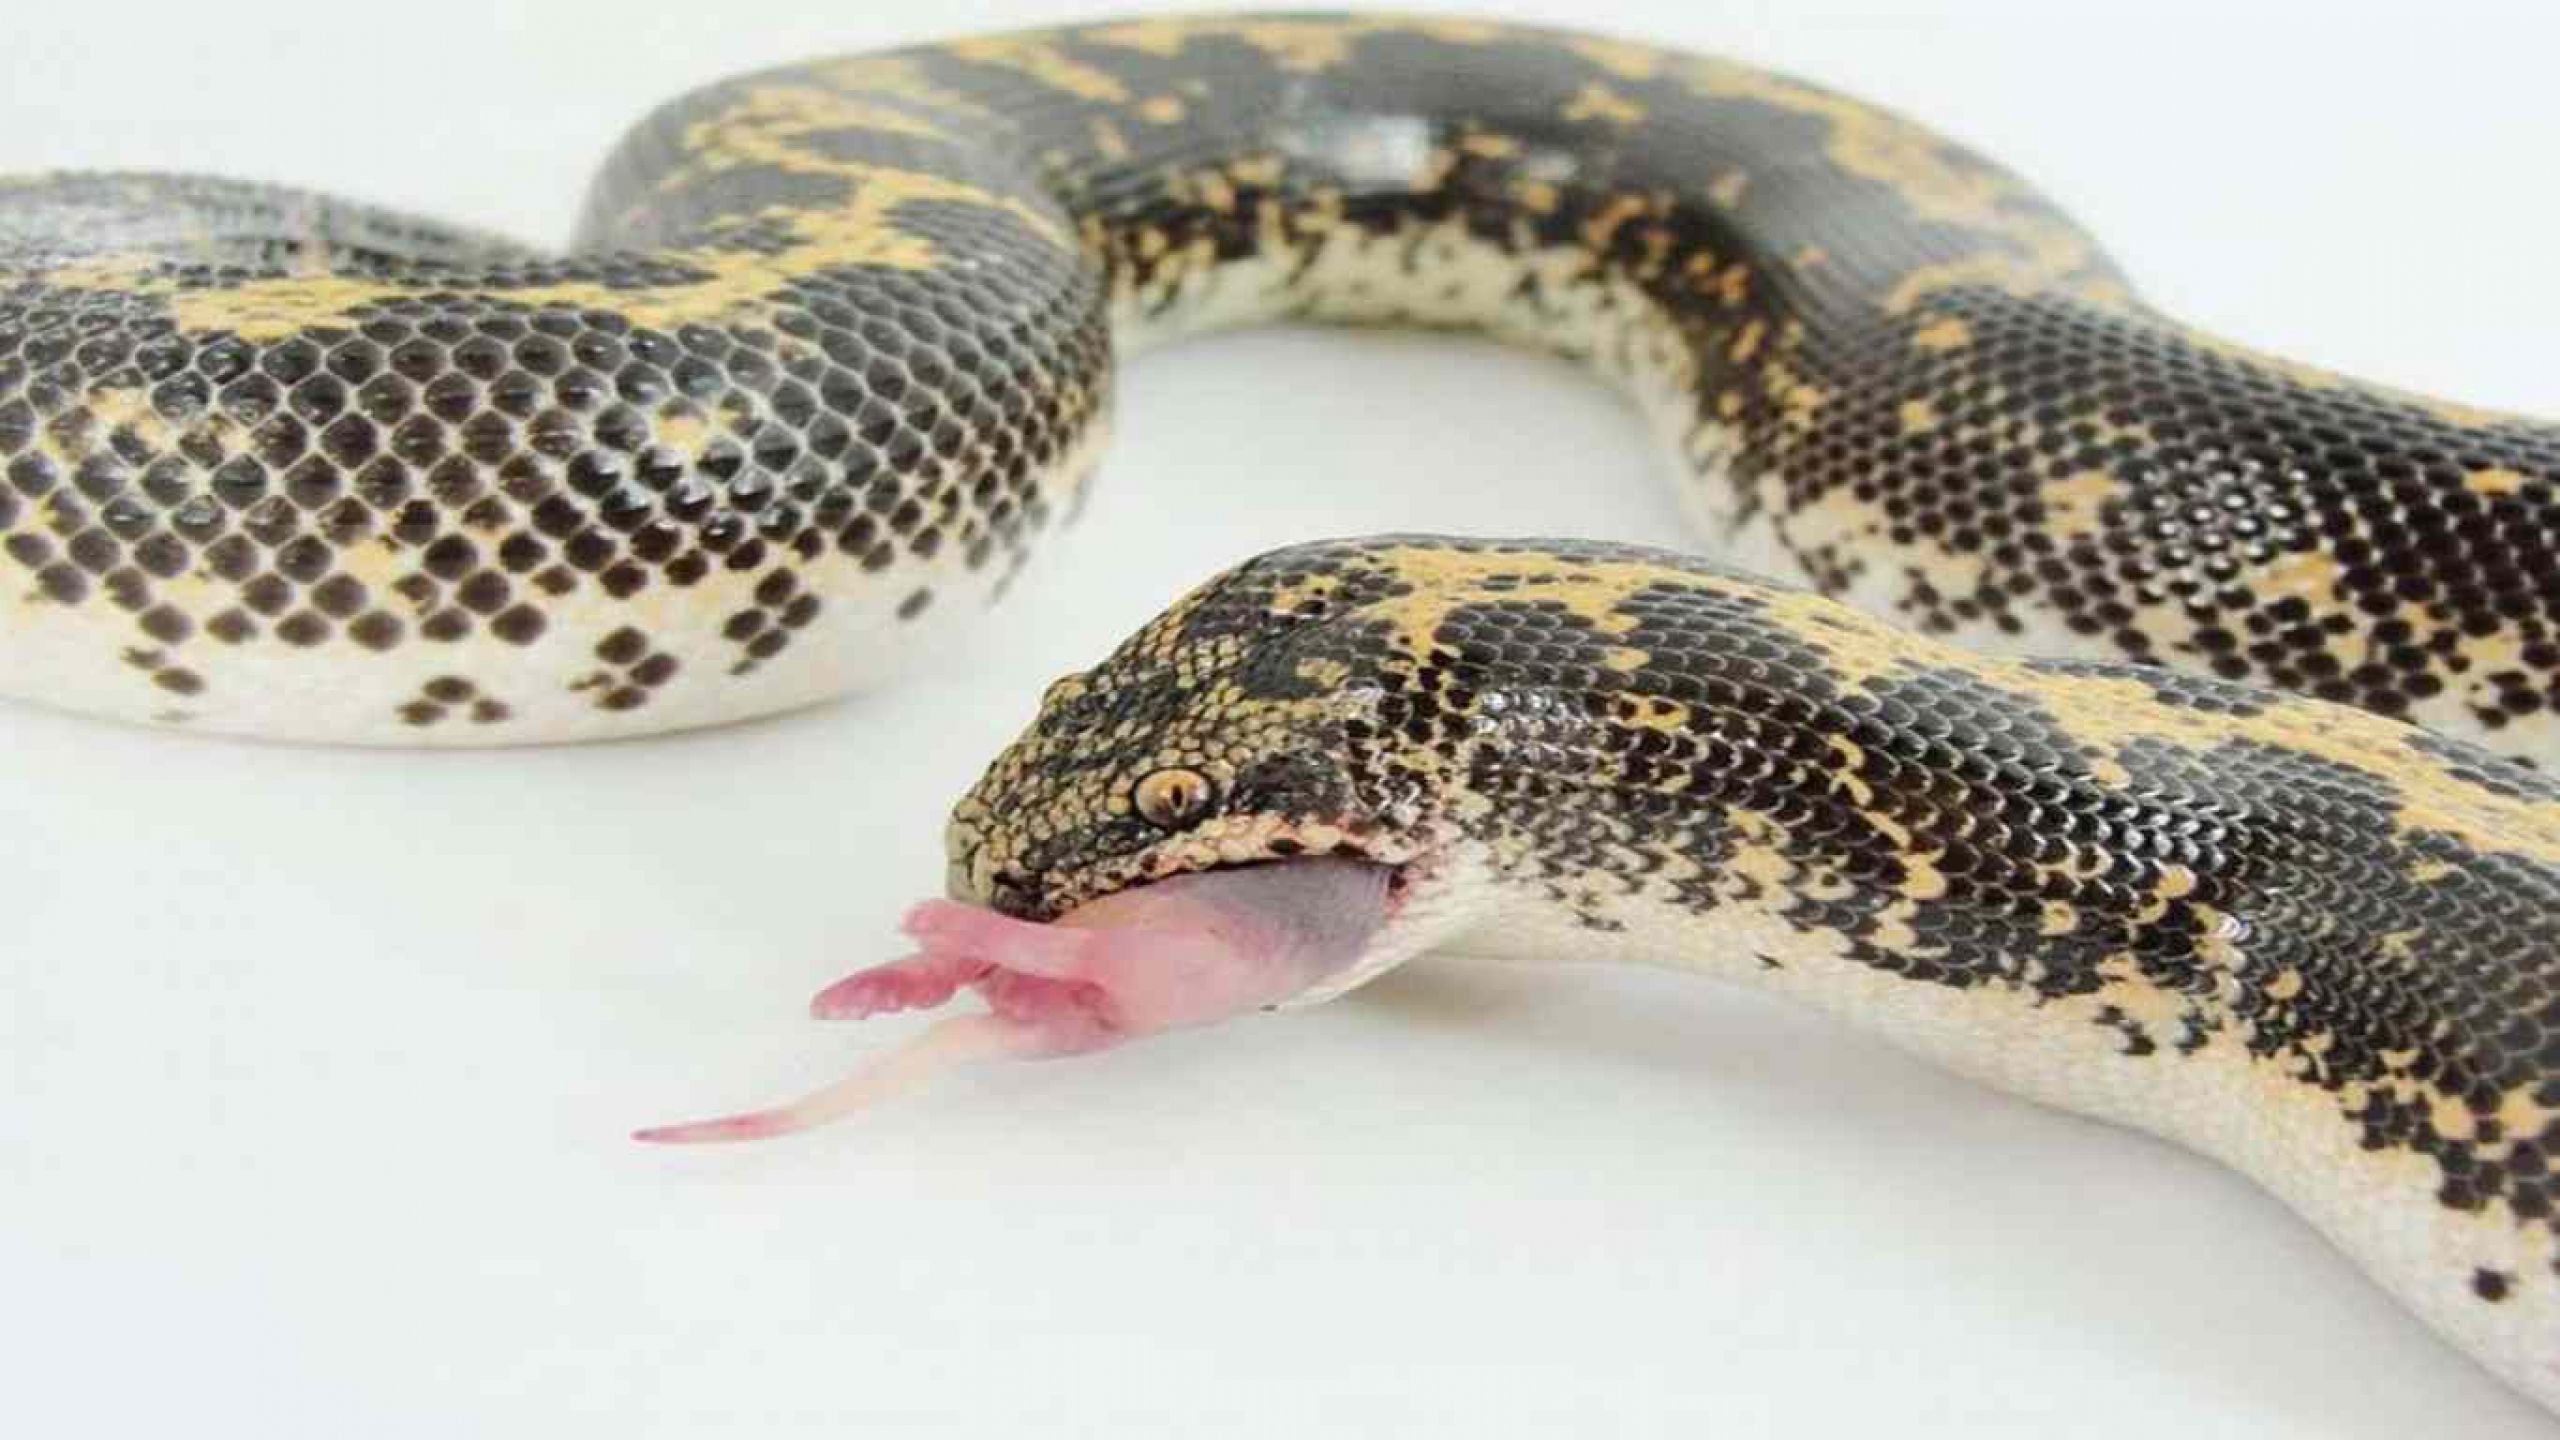 image of snakes eating download